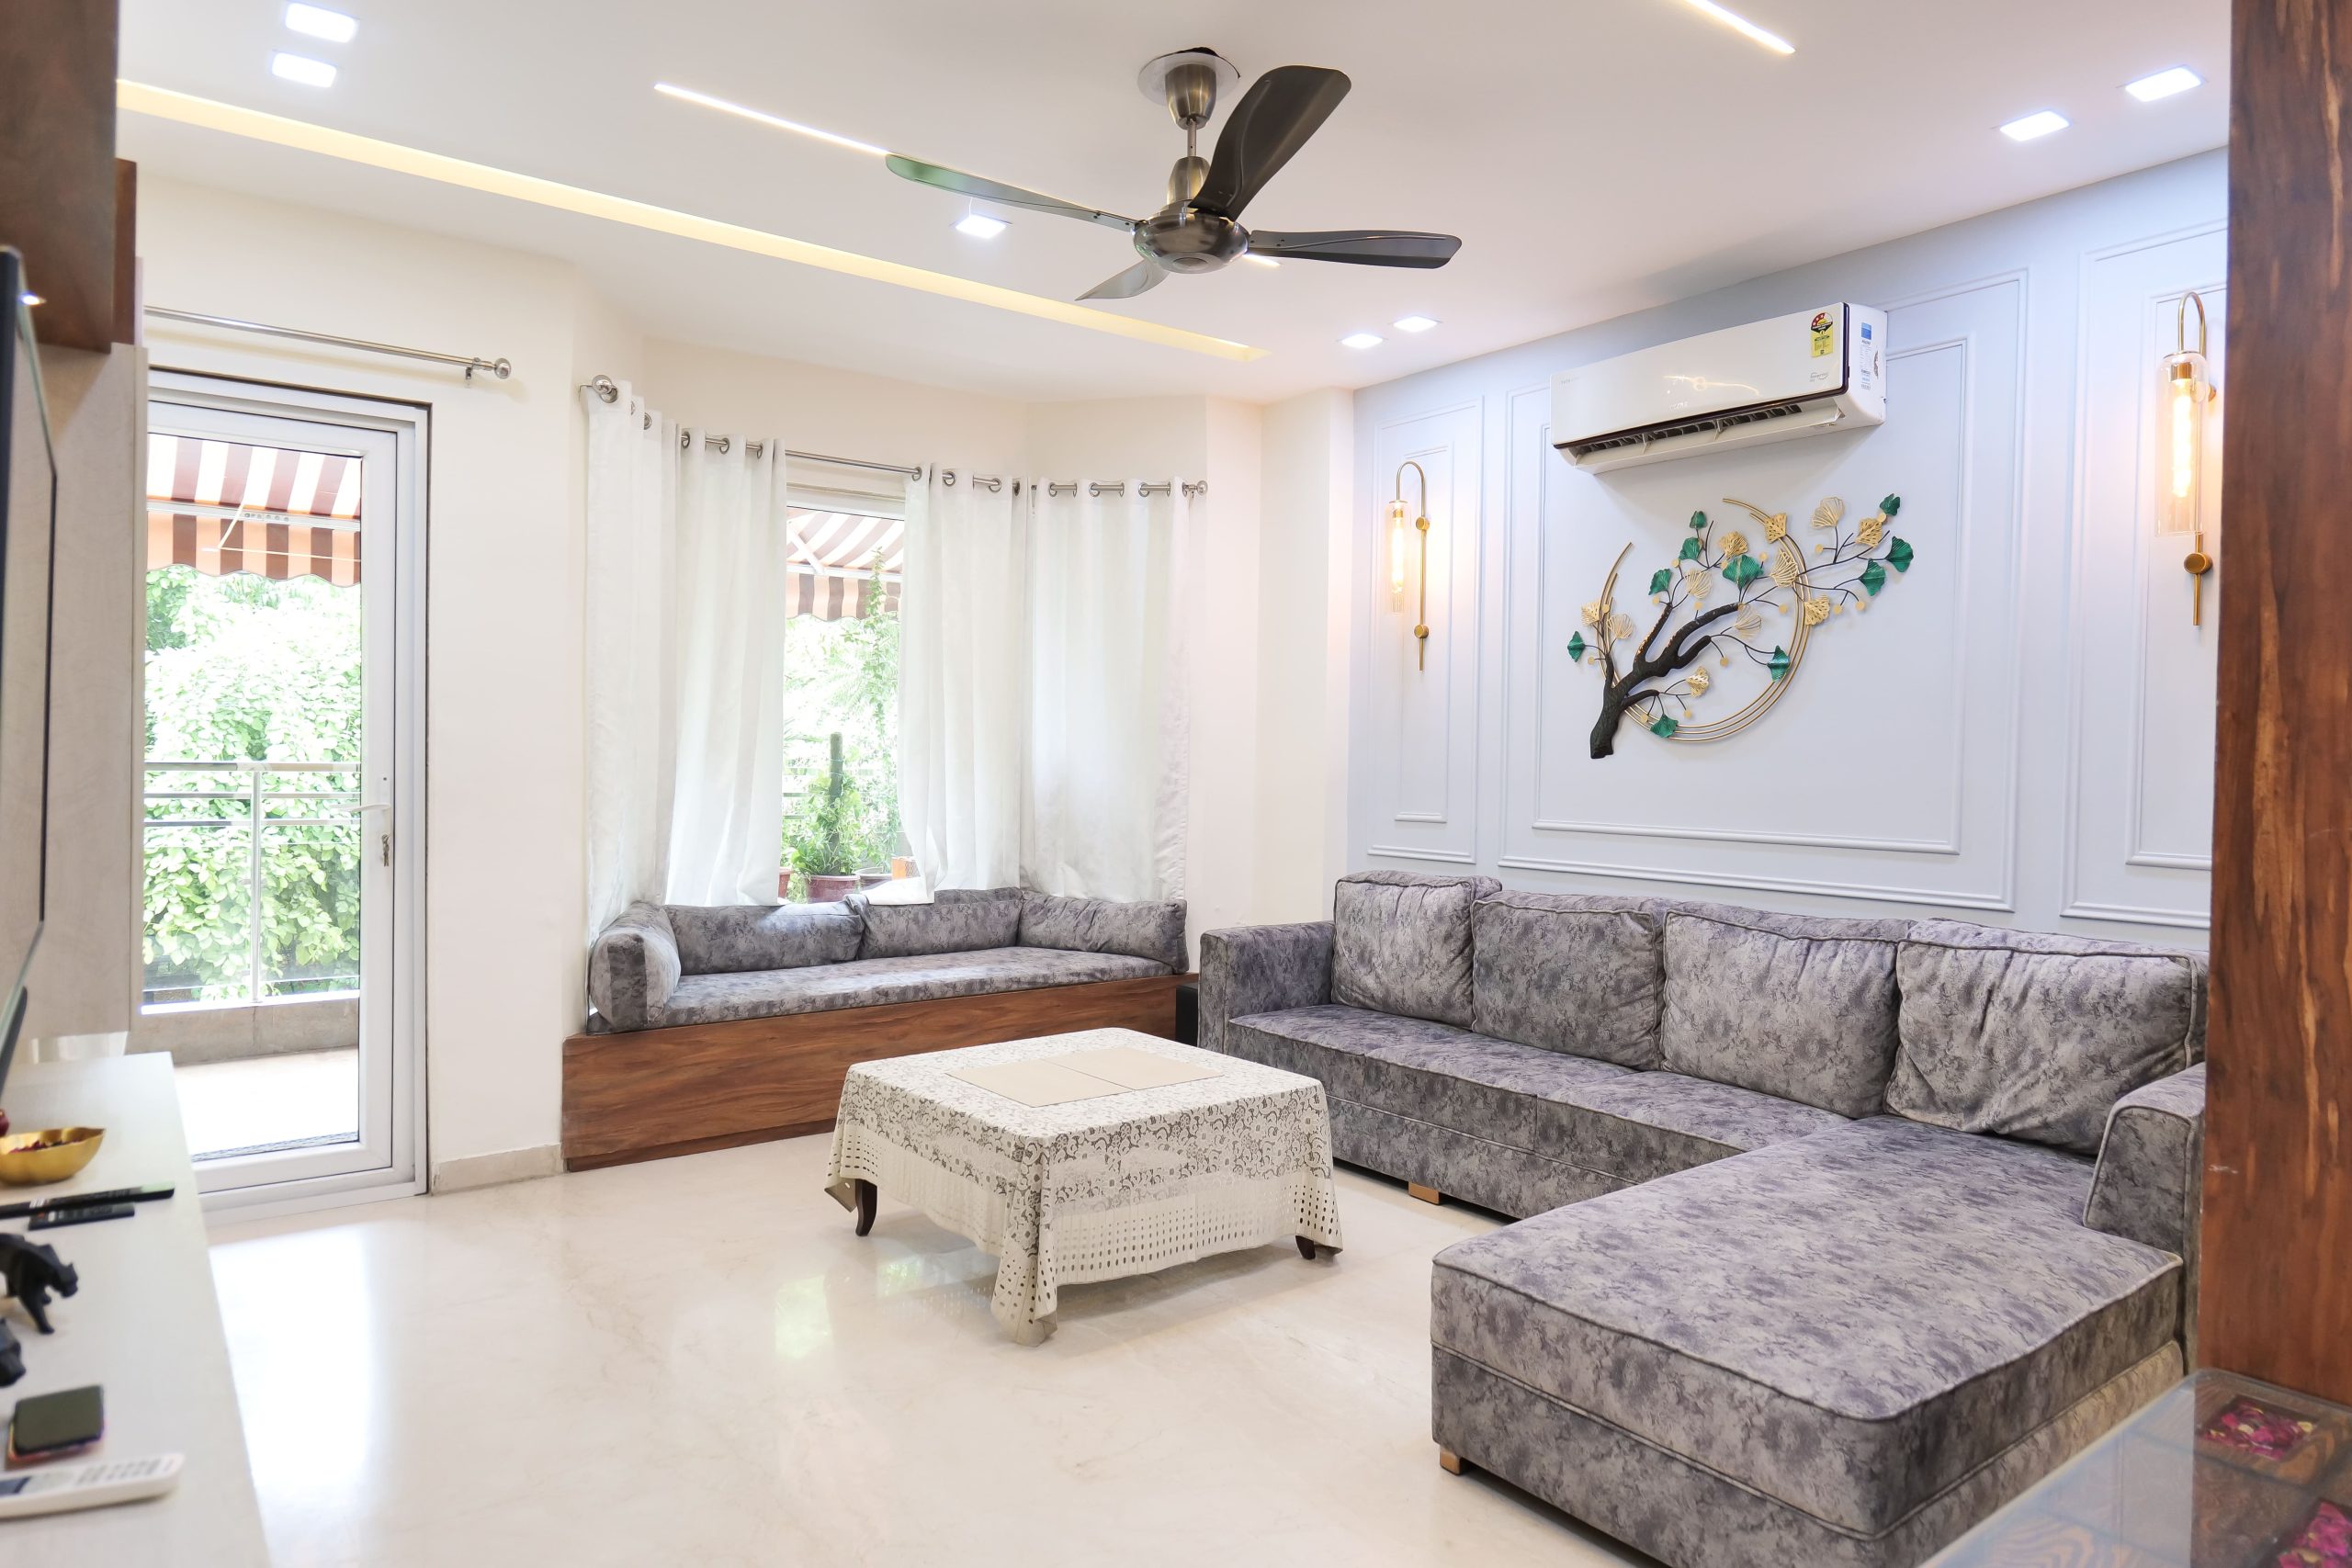 3bhk flat interior design ideas for your homes